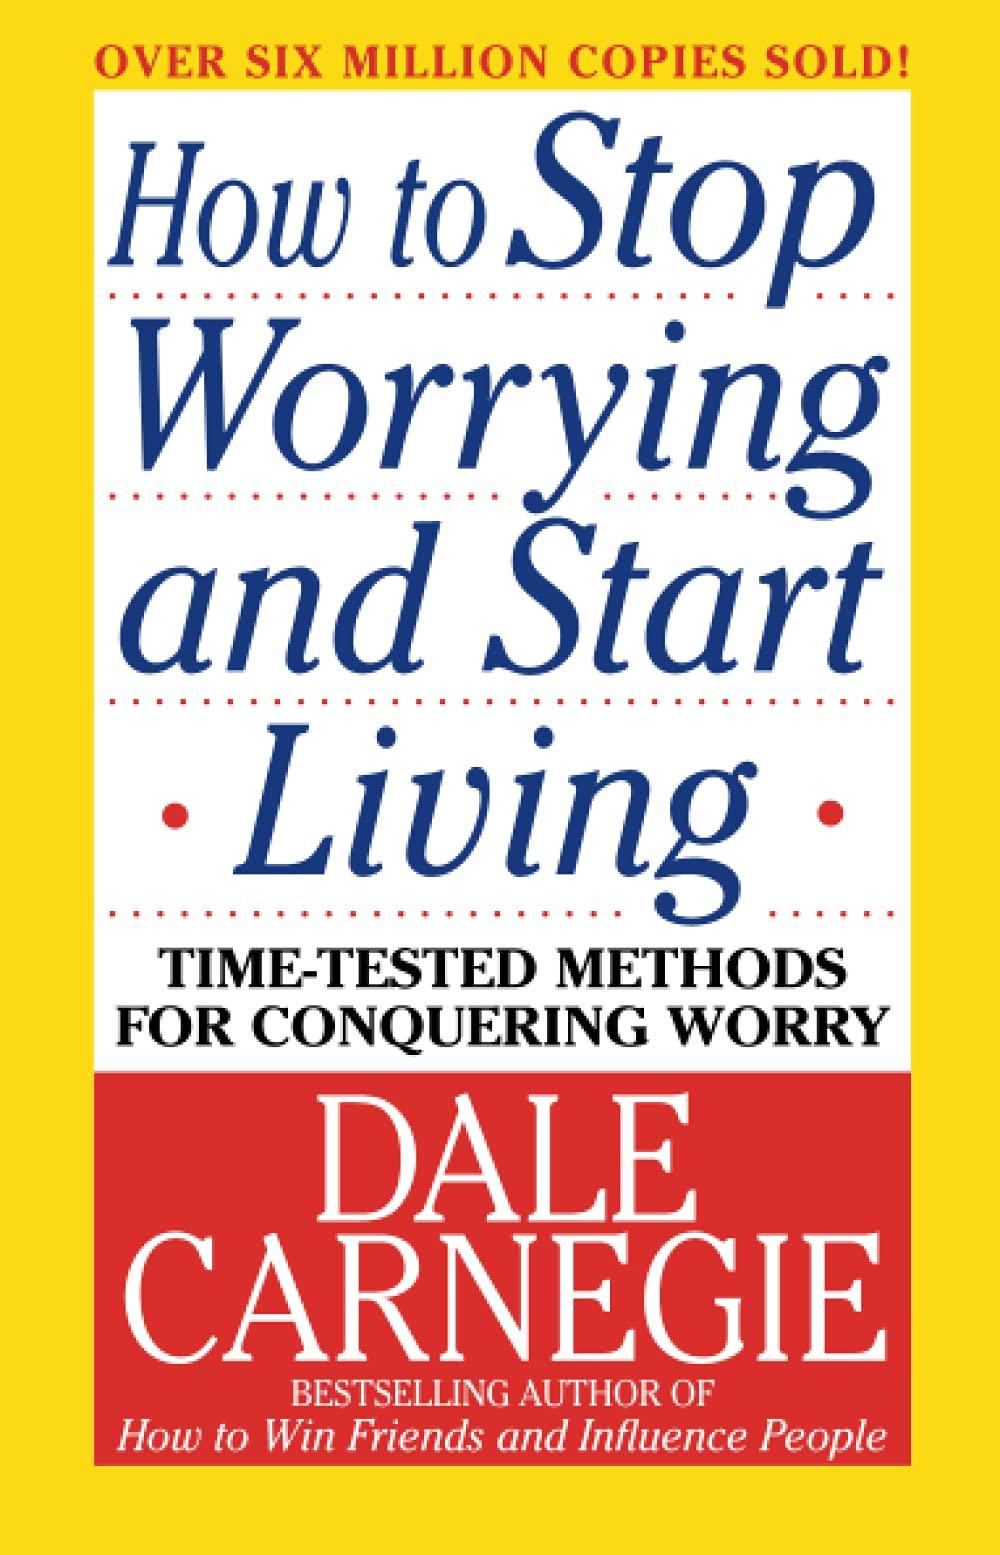 How to Stop Worrying and Start Living by Dale Carnegie book cover